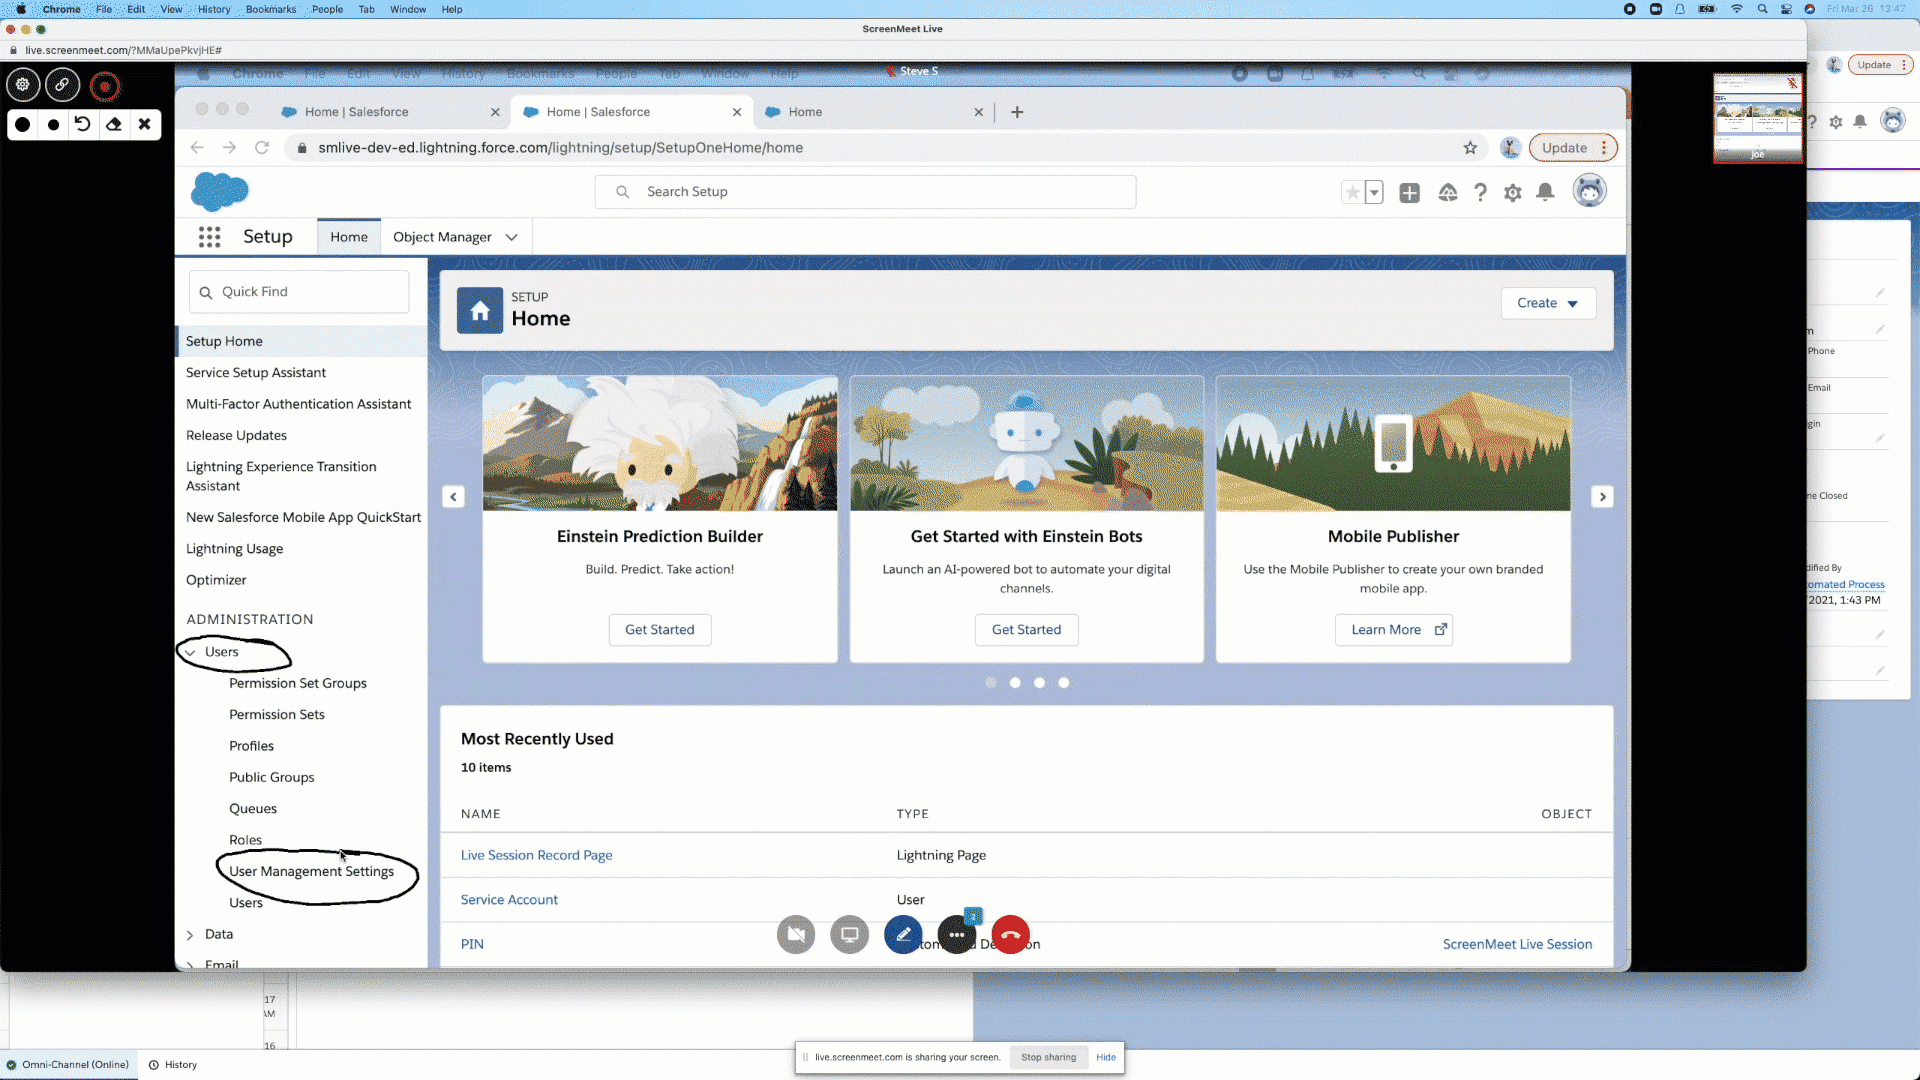 ScreenMeet for Salesforce Help Desk - Remote Support and Live